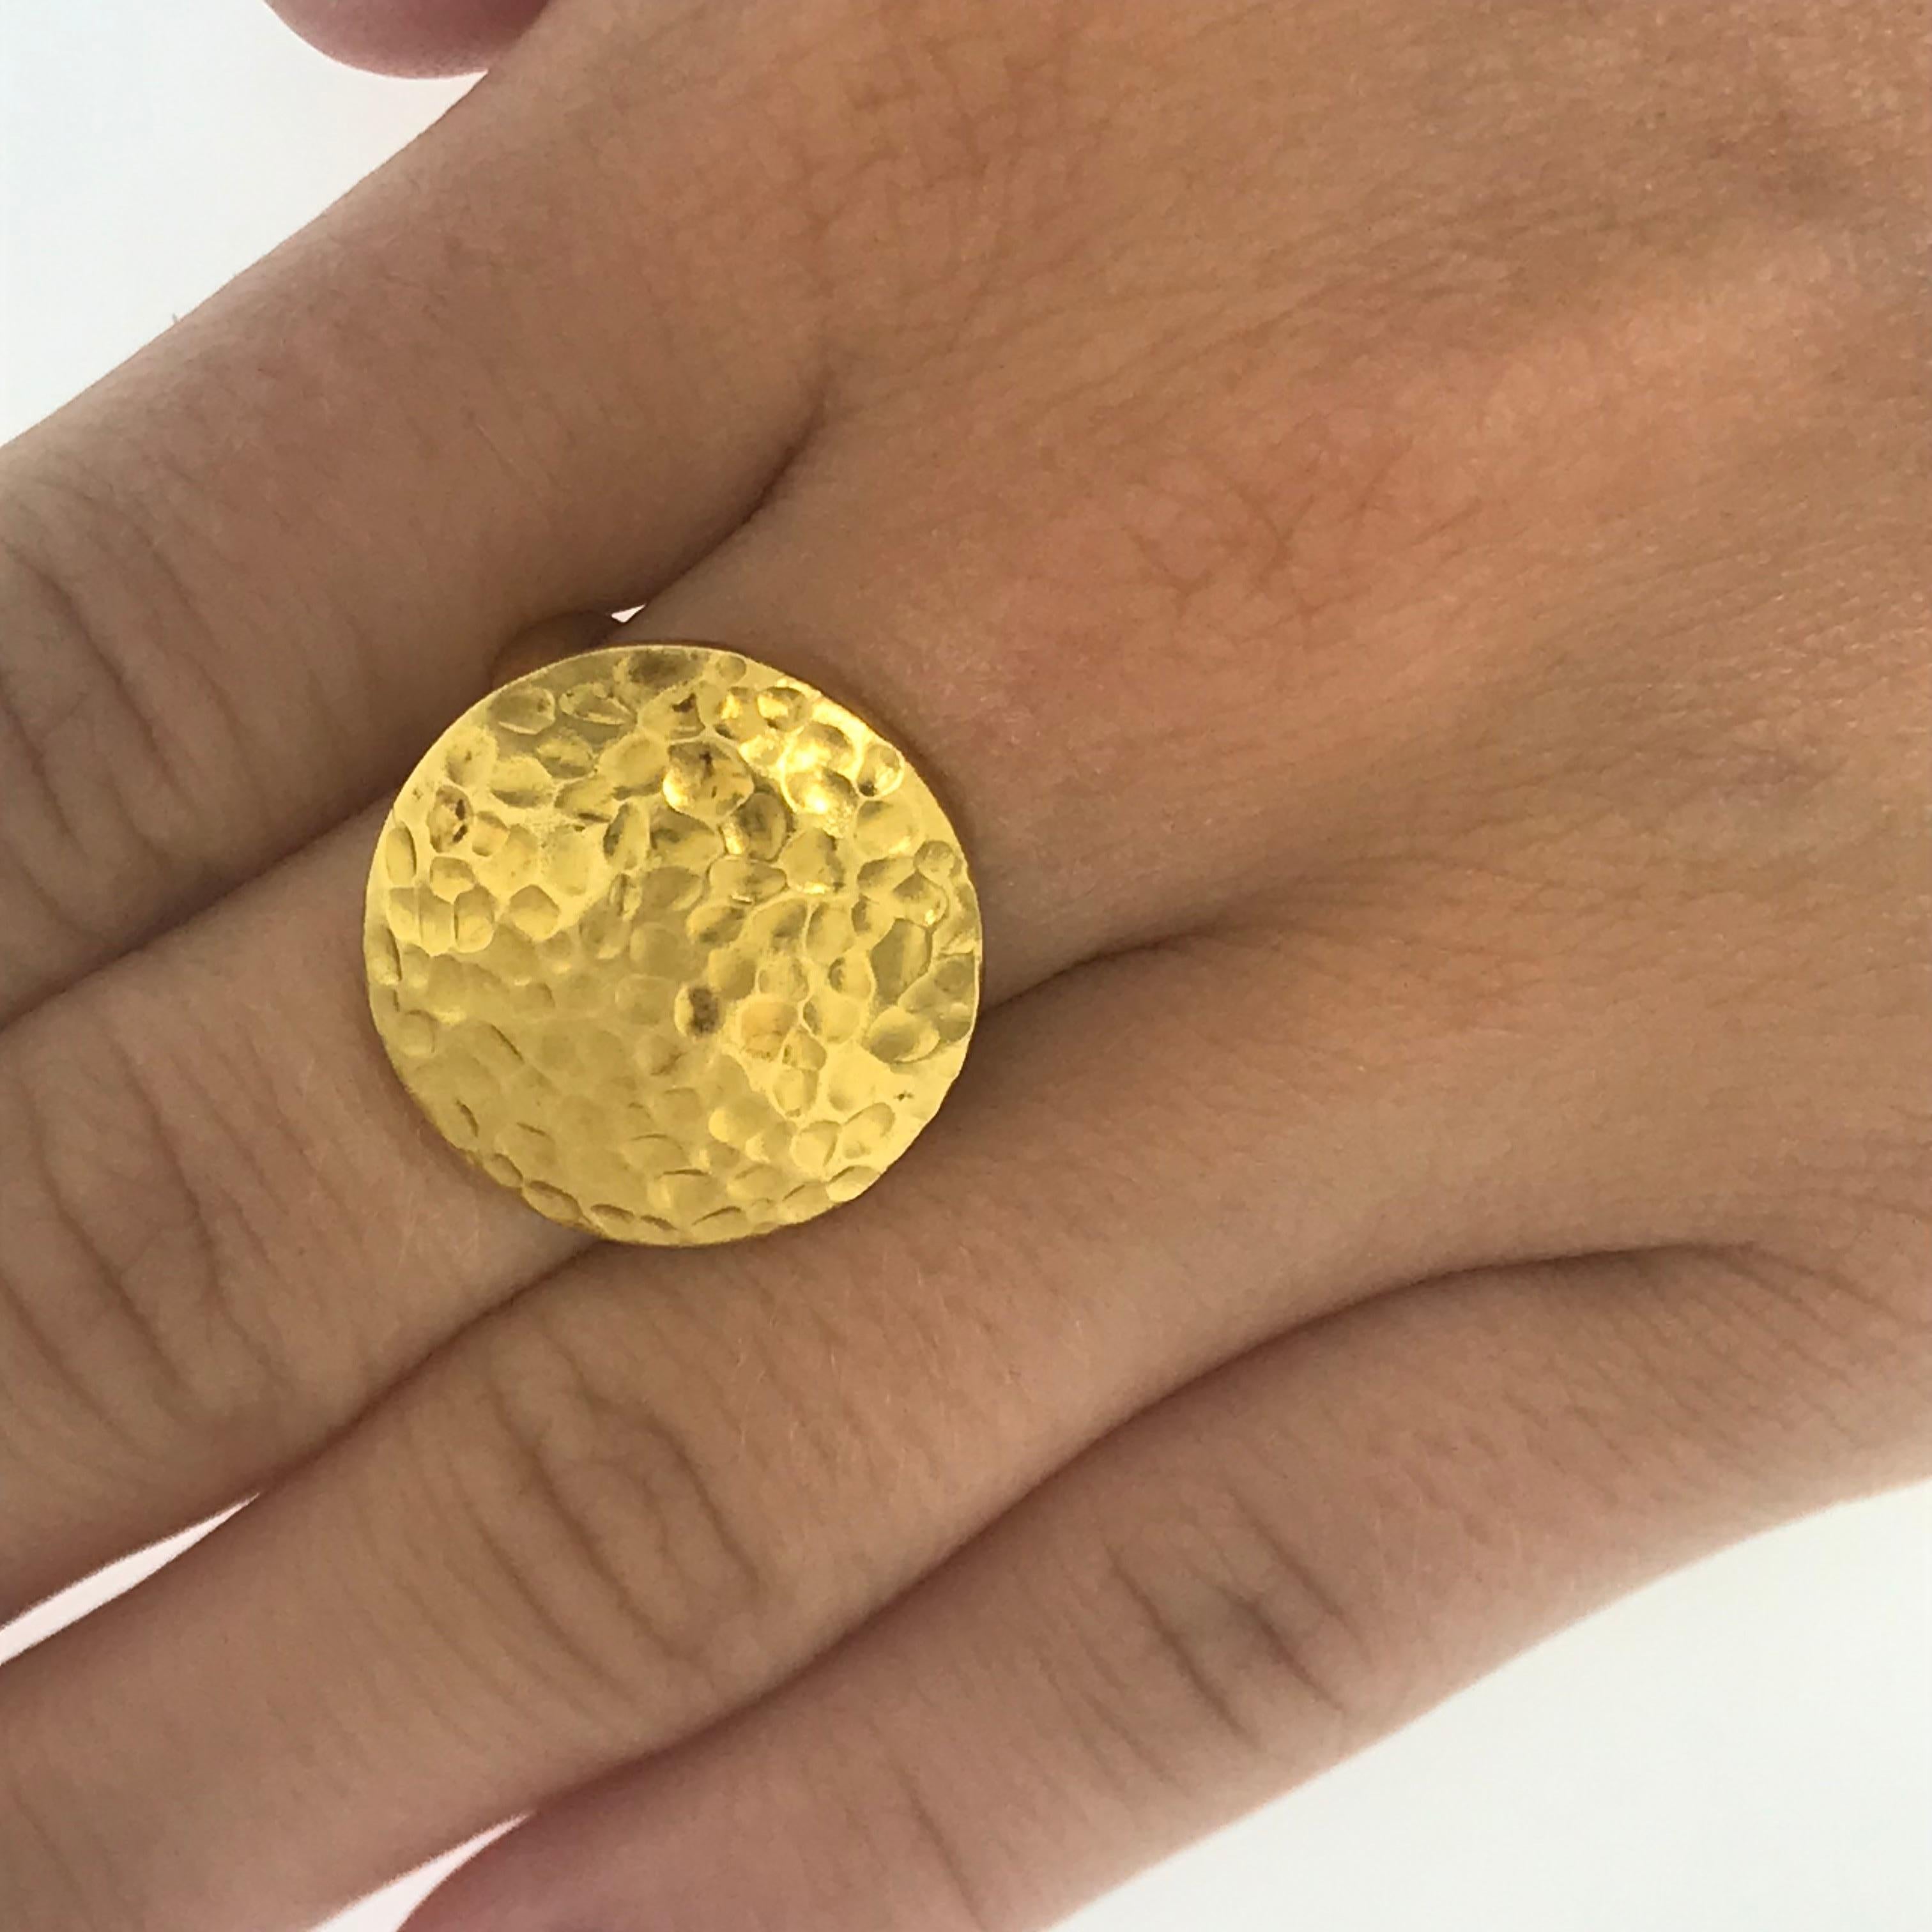 18 Karat Hammered Gold Ring 

This rich 22 karat yellow gold patina ring is bold and beautiful! The handmade hammered detail work is a true art form. This ring is versatile and can be an easy everyday wear or a dramatic piece for a formal event. The